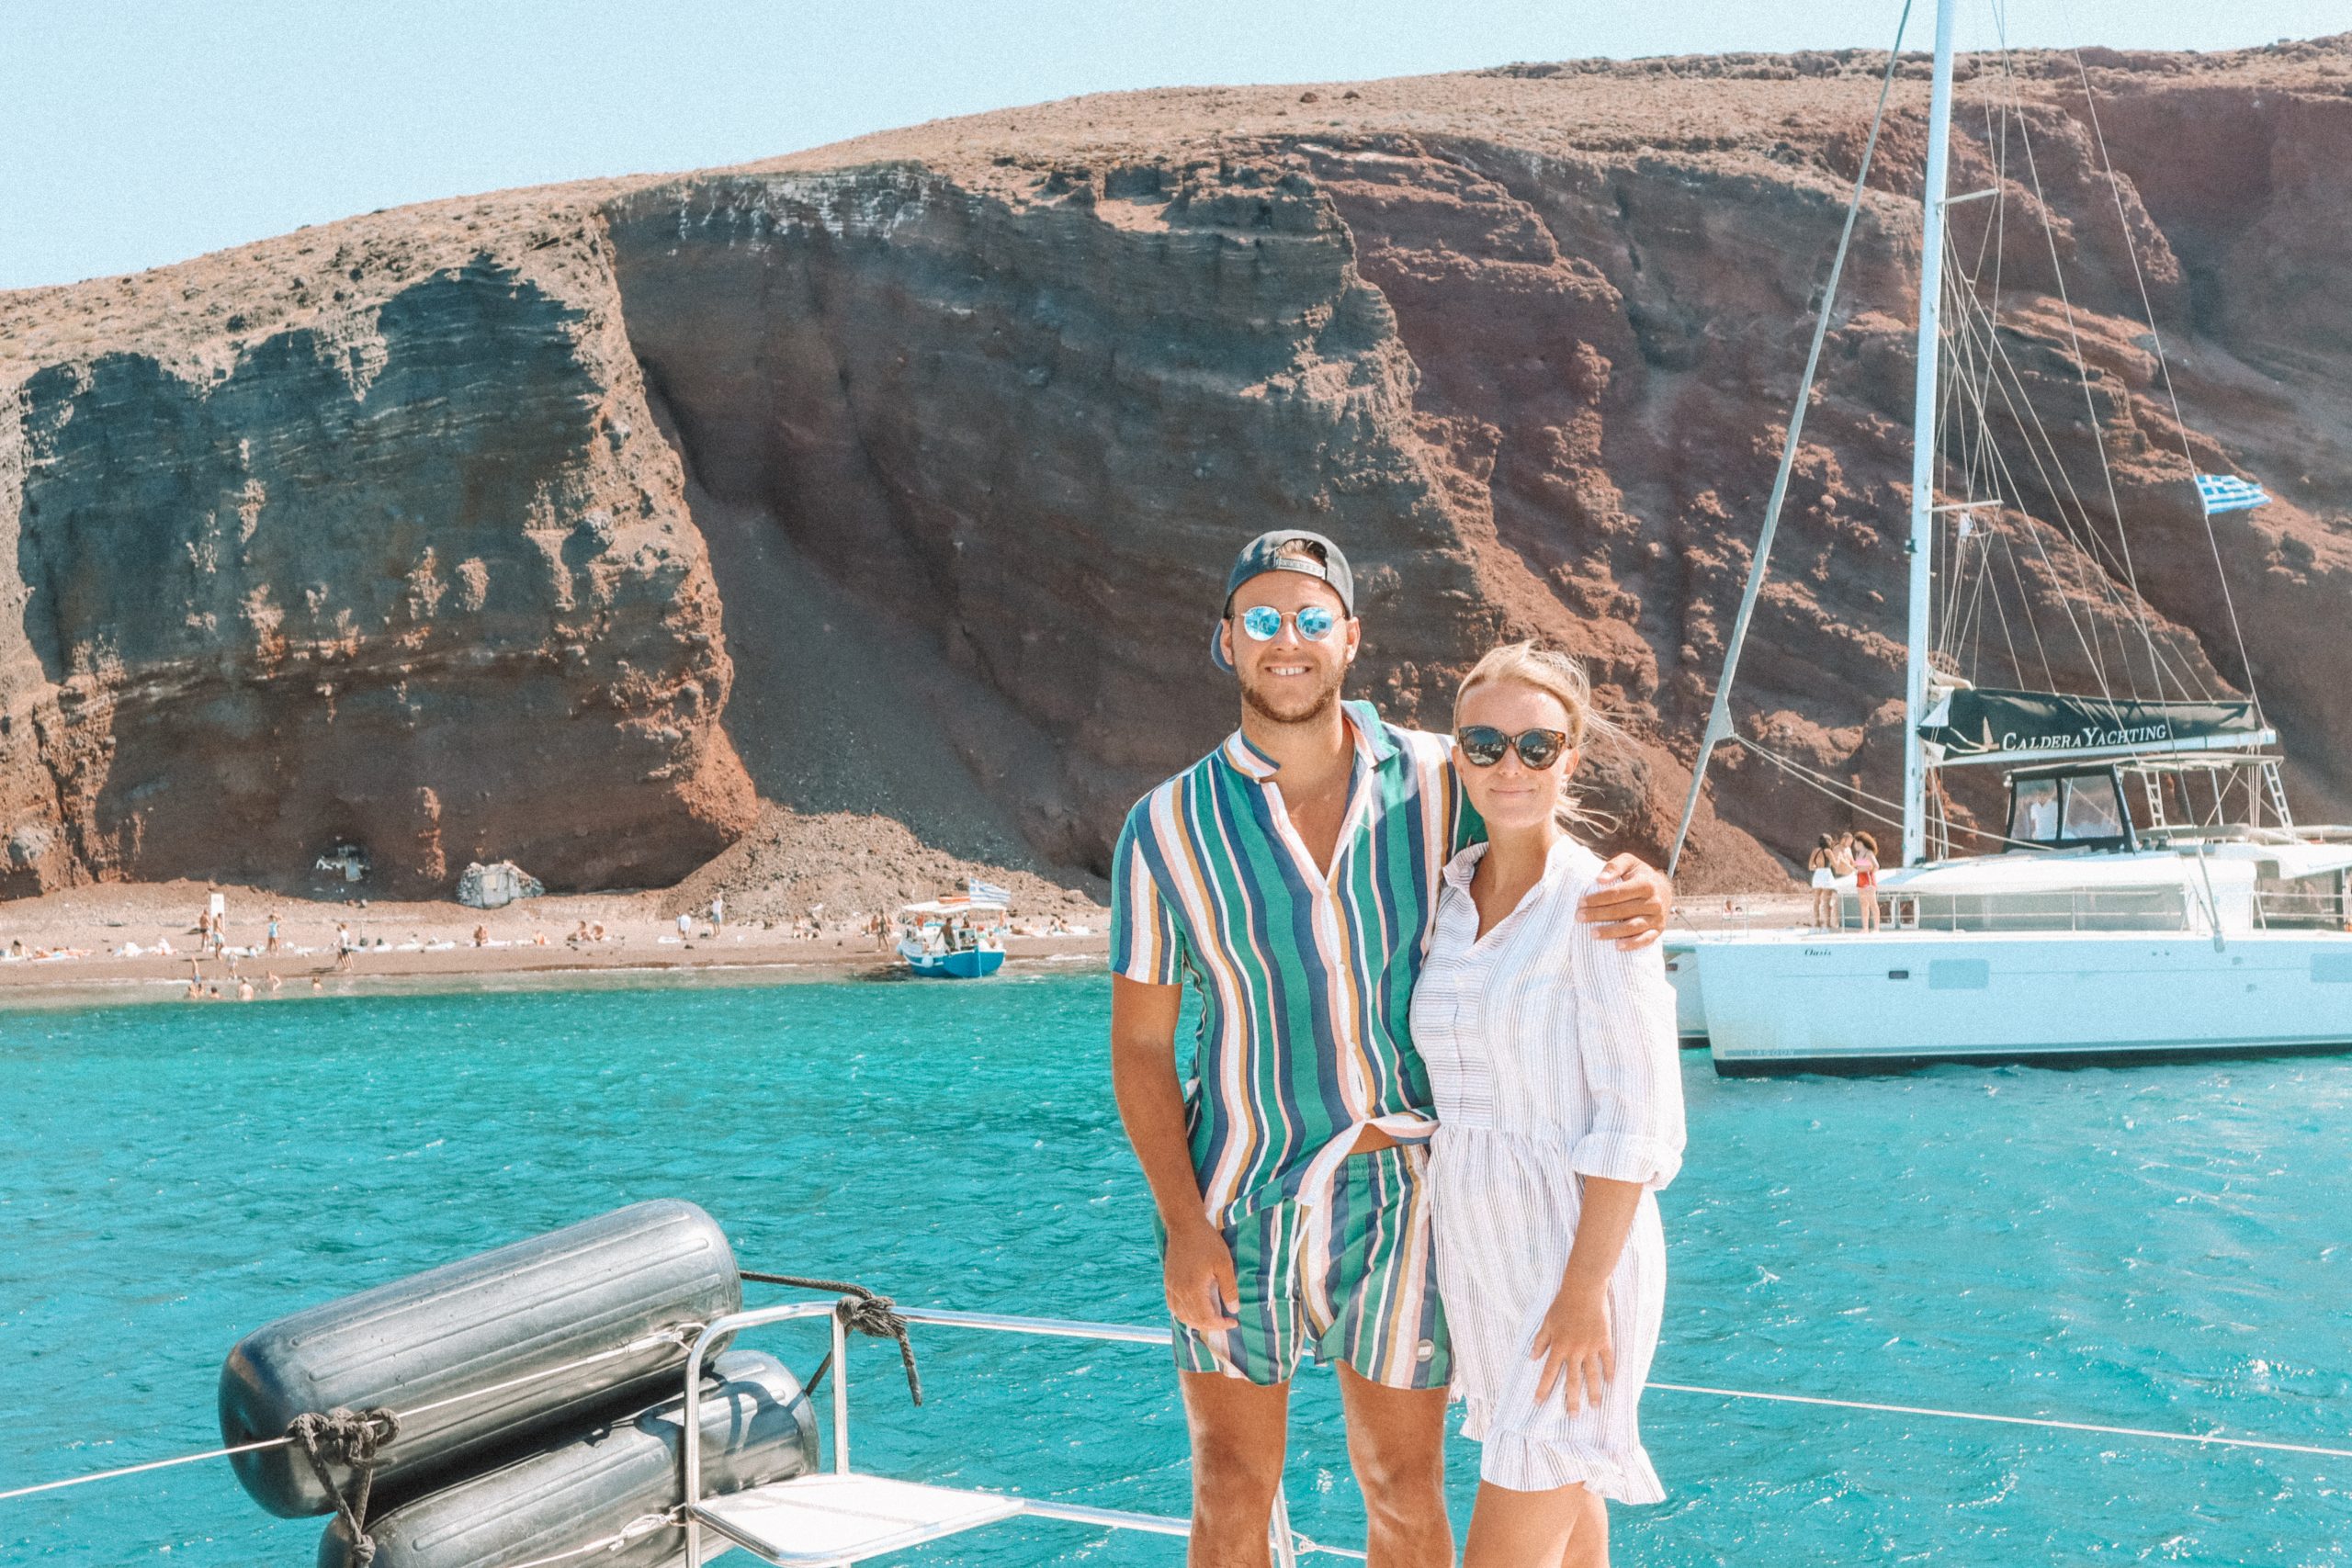 A couple stood on a boat with turquoise water and the red beach in the background. Things to do in Santorini